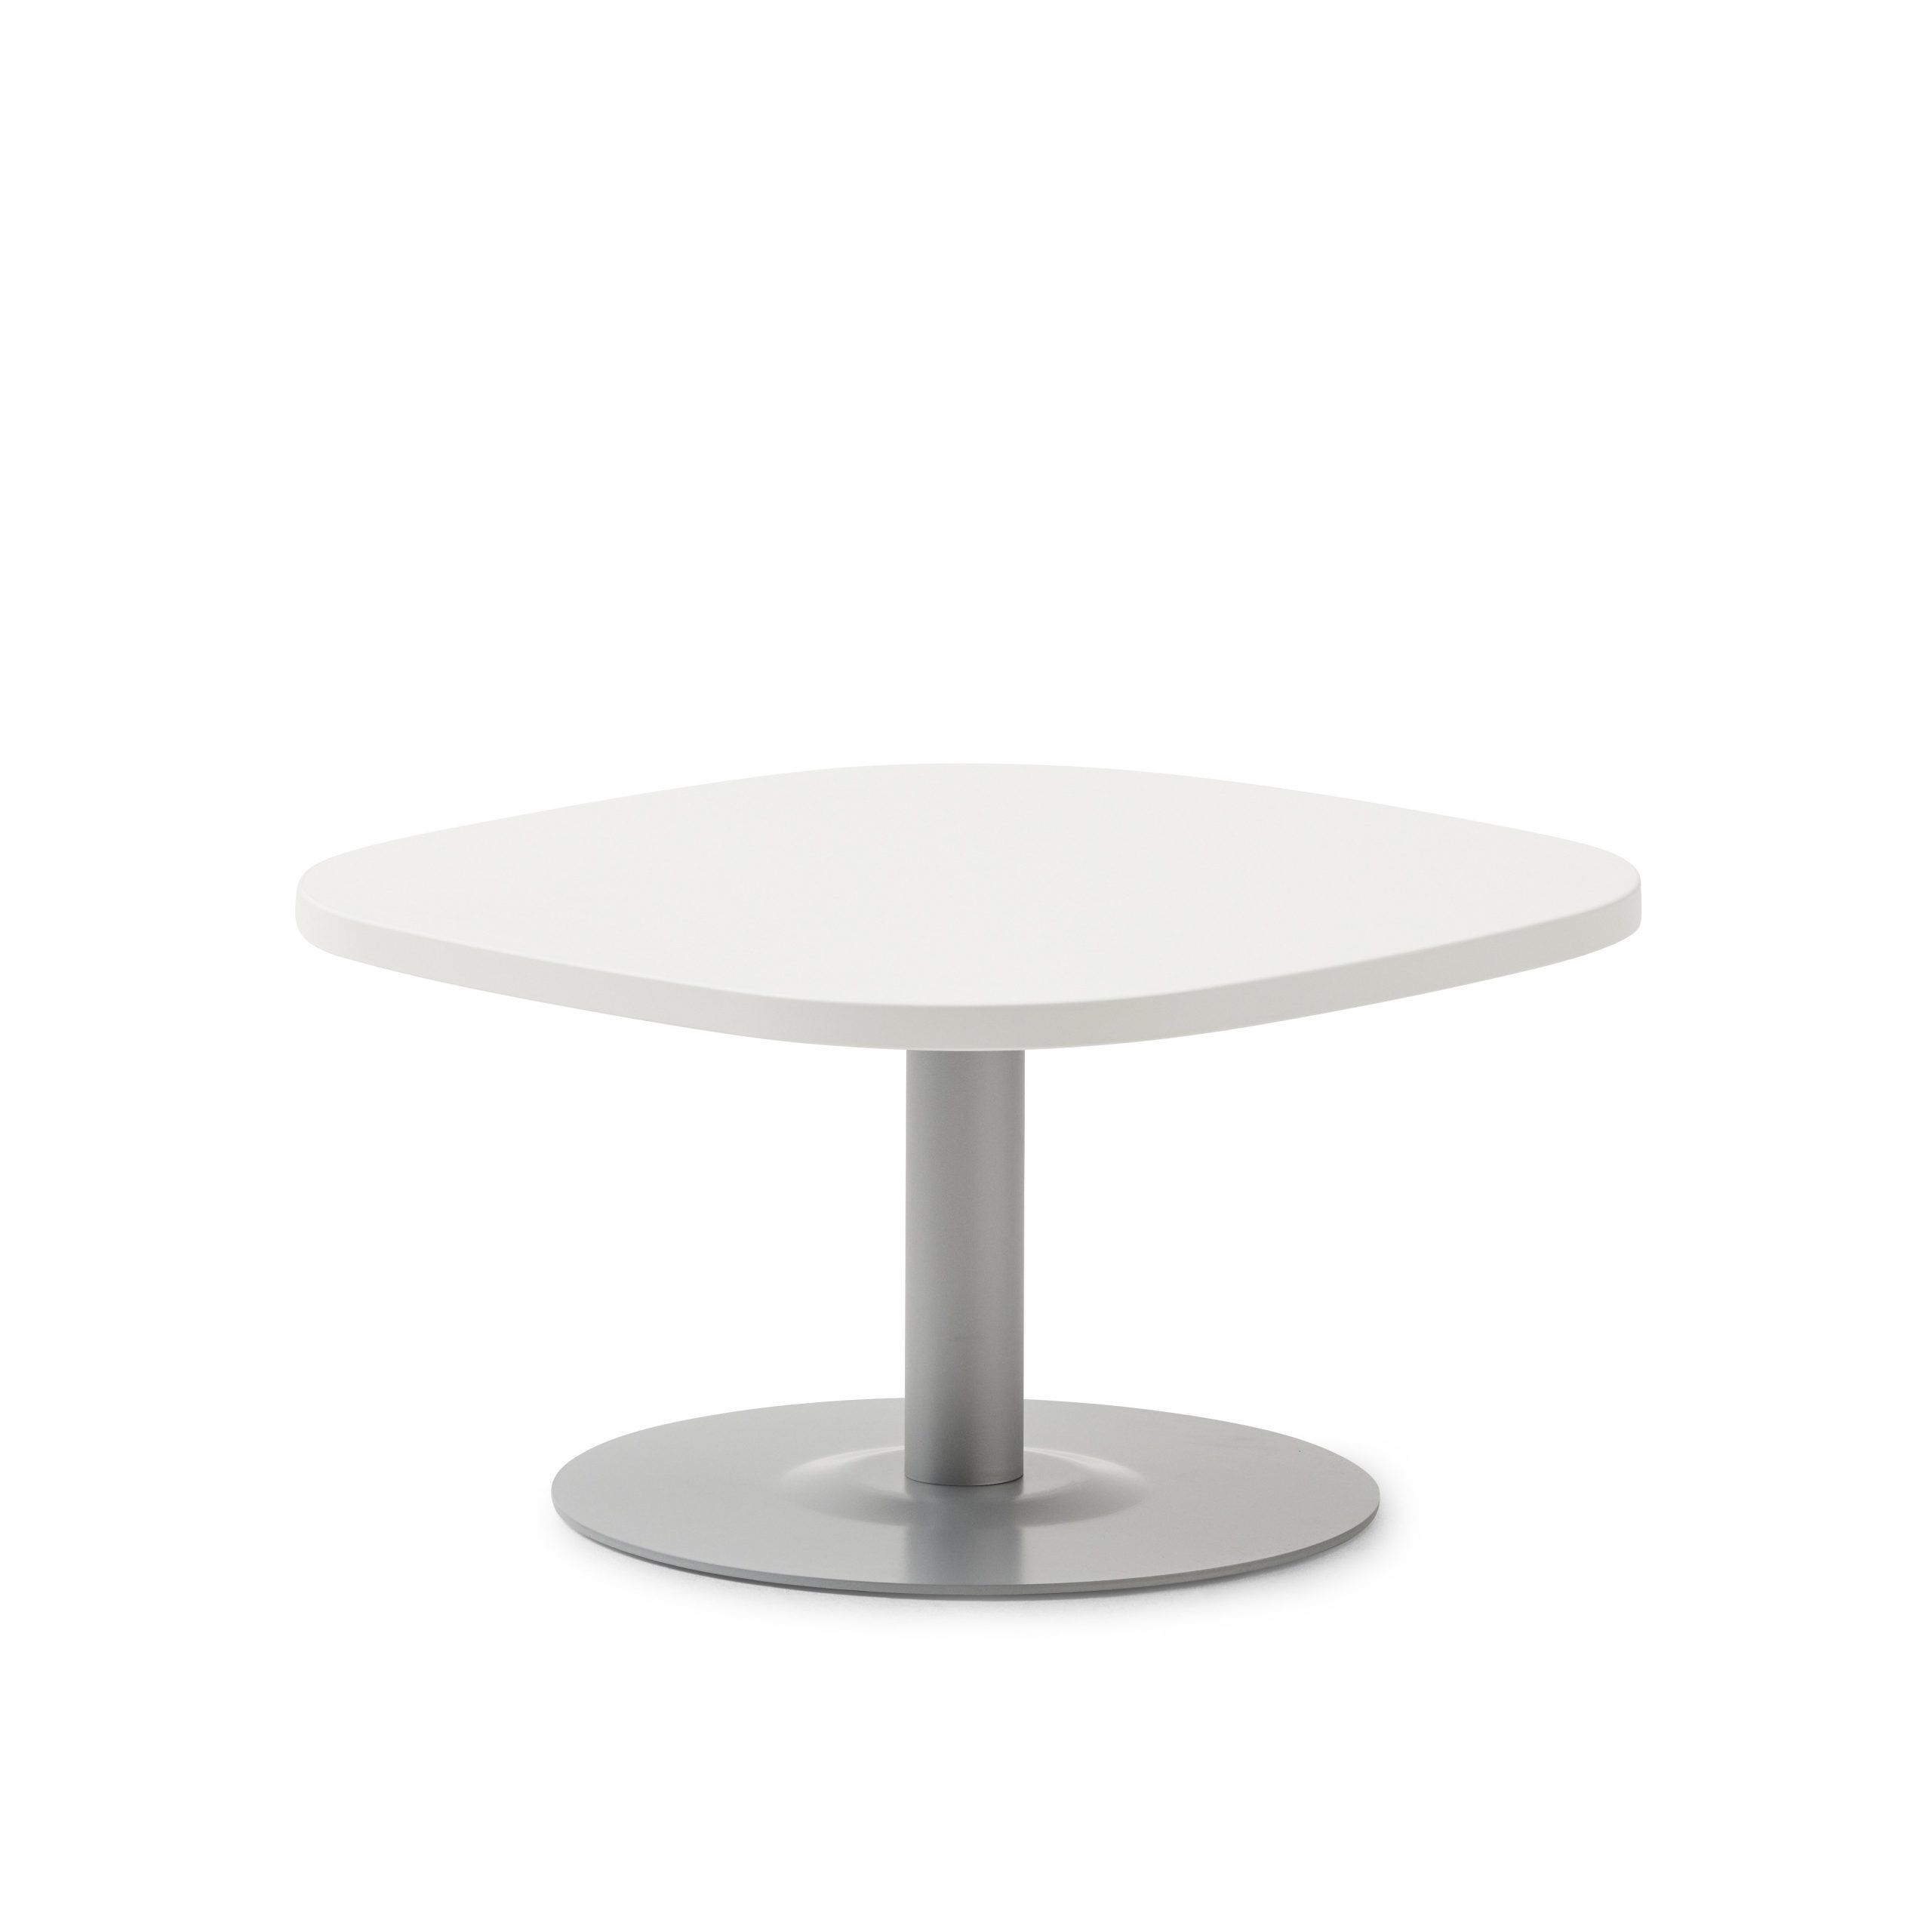 Jive Collaborative Table | Haworth Throughout White T Base Seminar Coffee Tables (View 4 of 15)